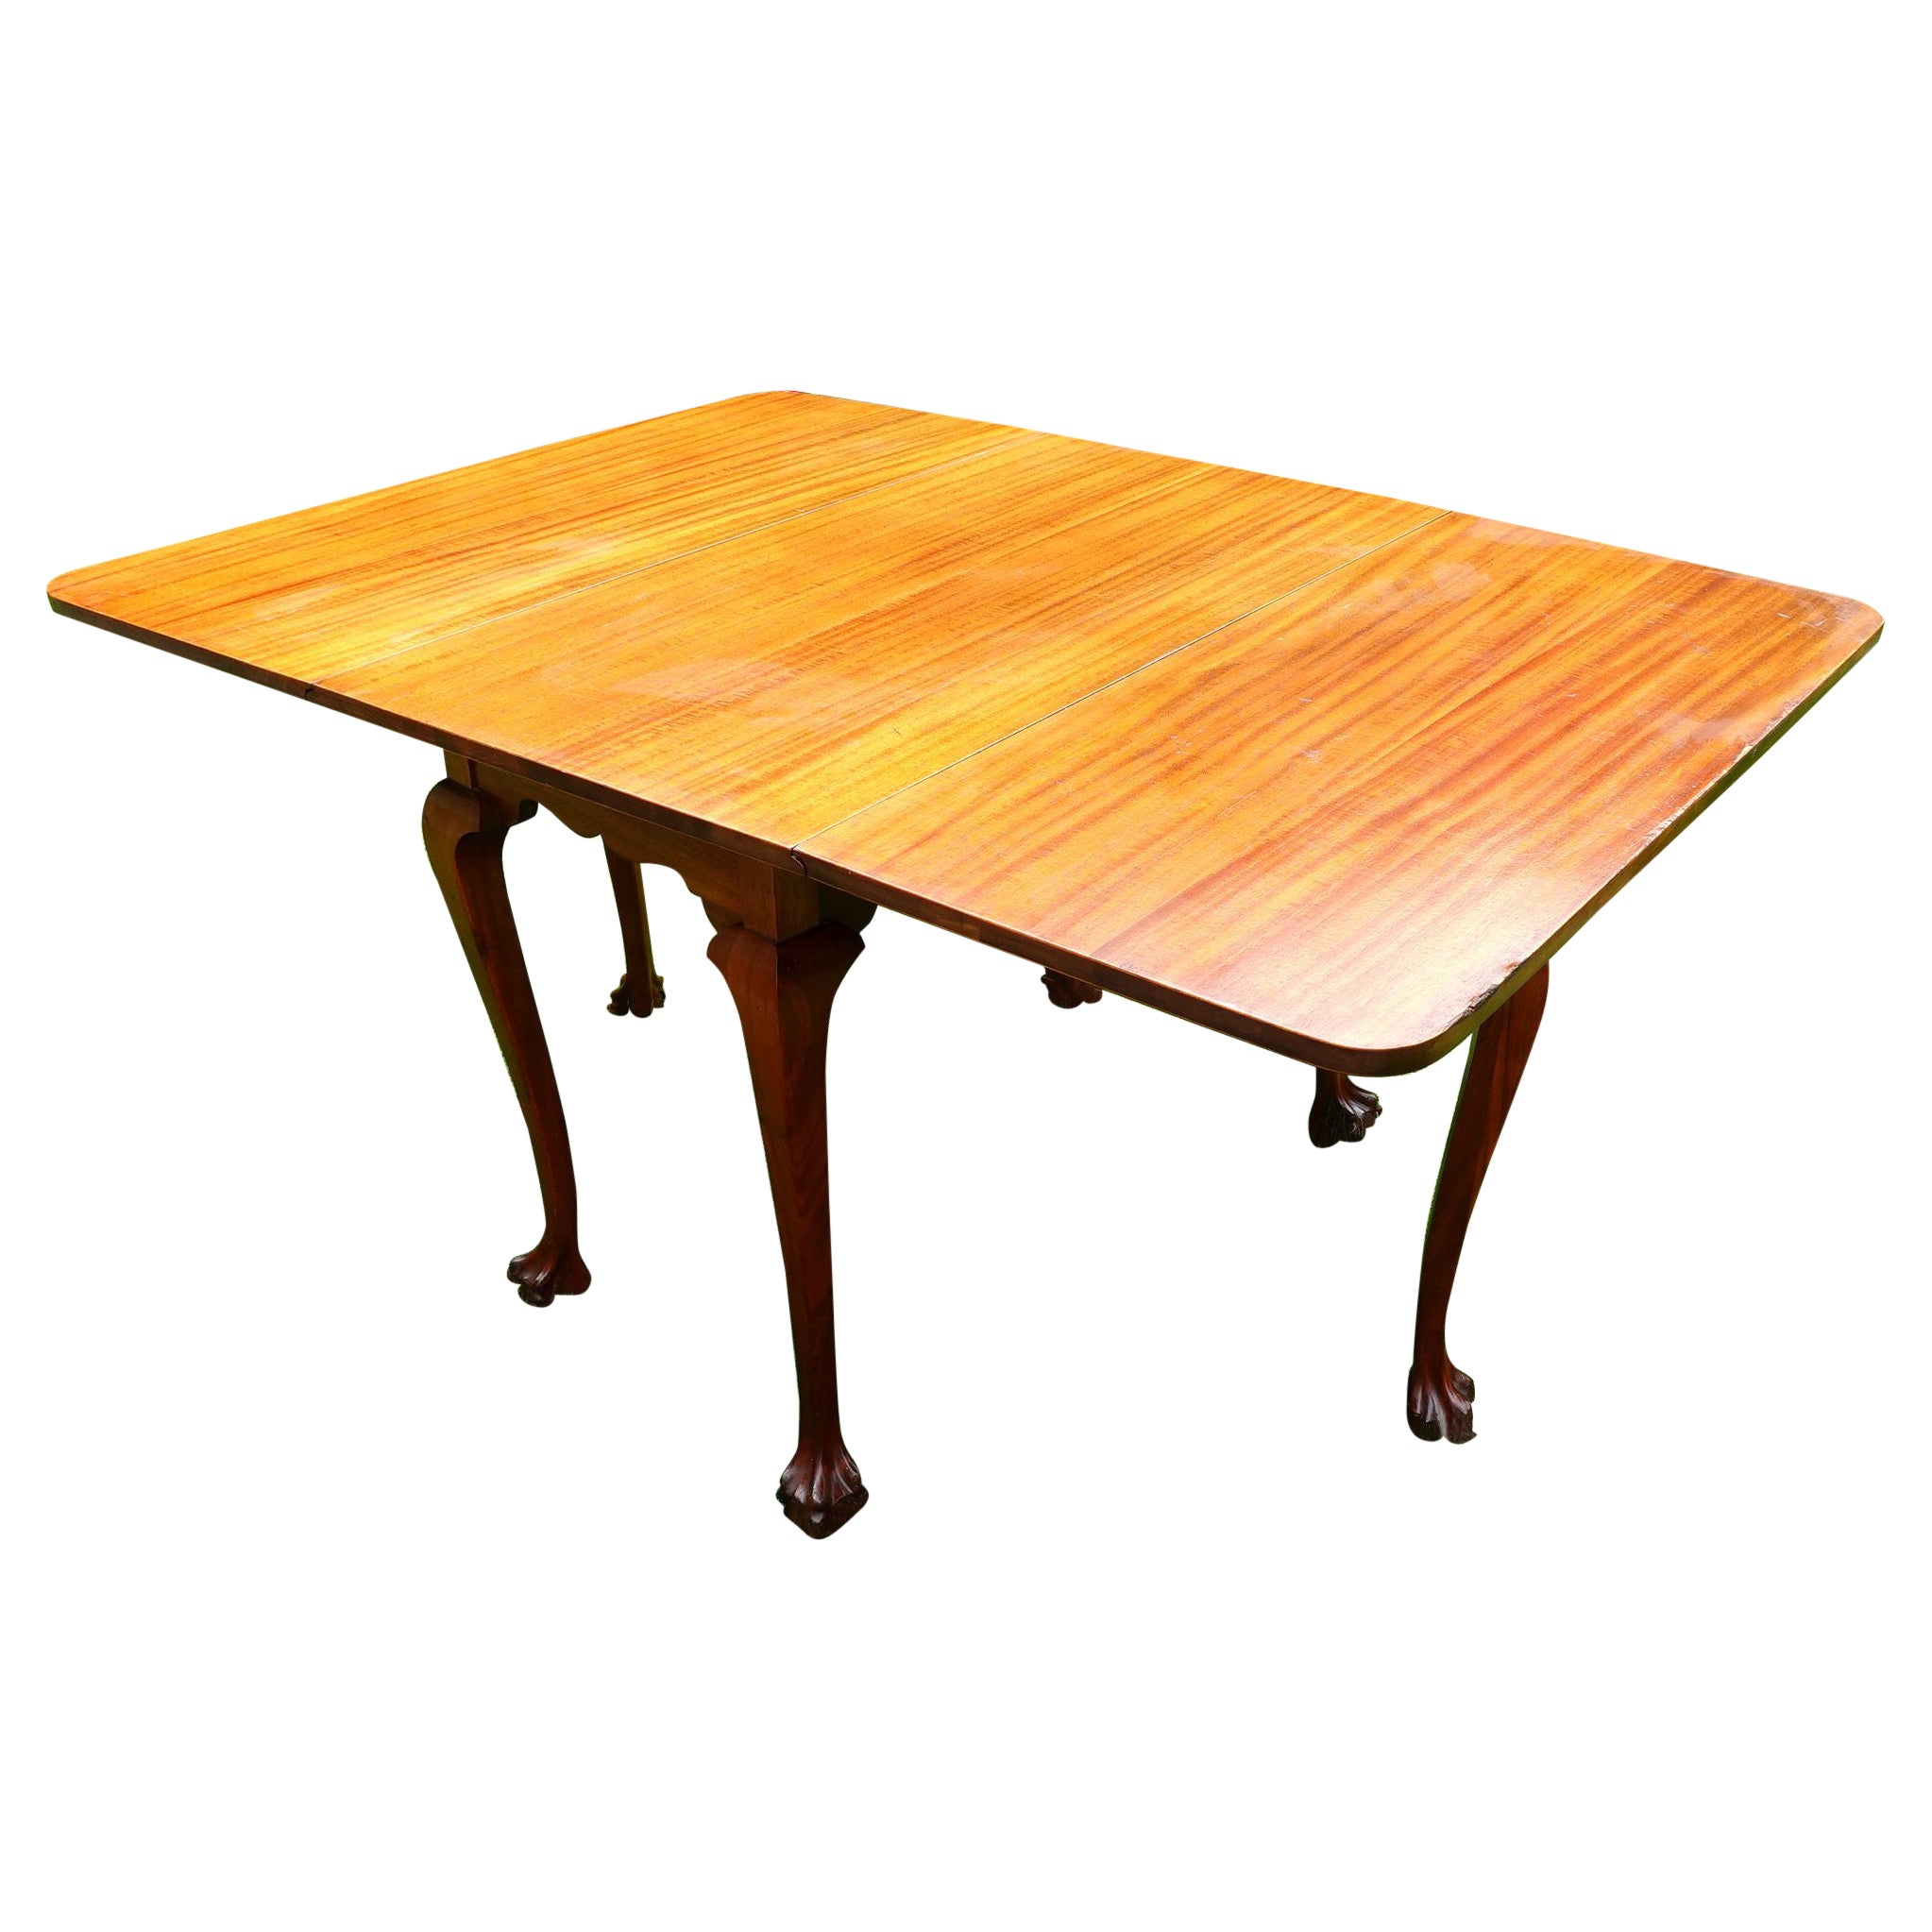 Chippendale Six Leg Claw and Ball Drop-Leaf Dining Table